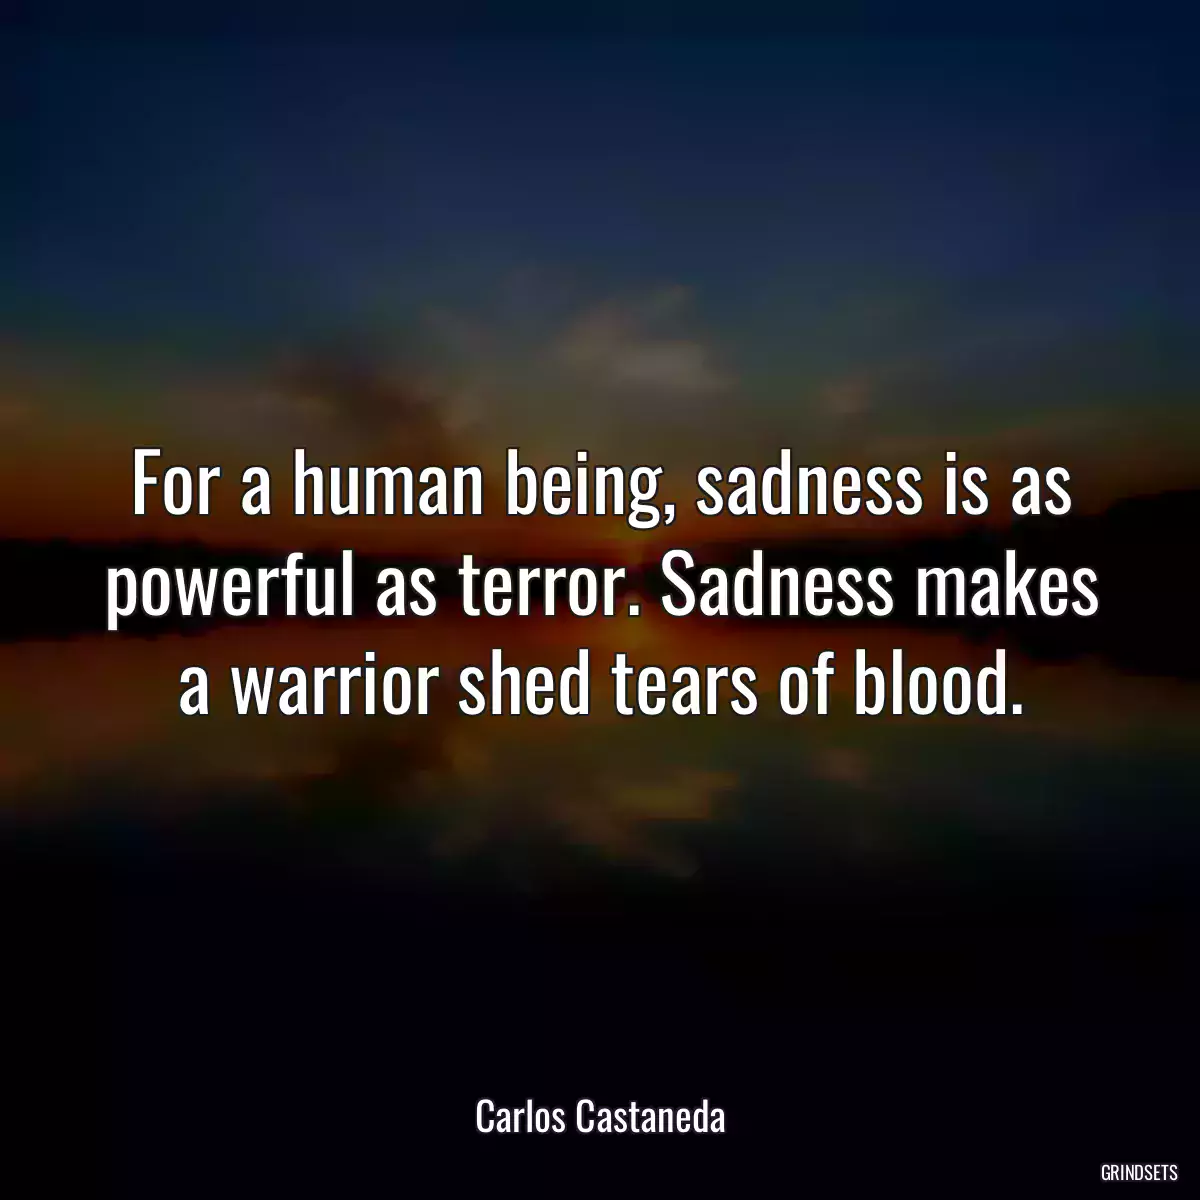 For a human being, sadness is as powerful as terror. Sadness makes a warrior shed tears of blood.